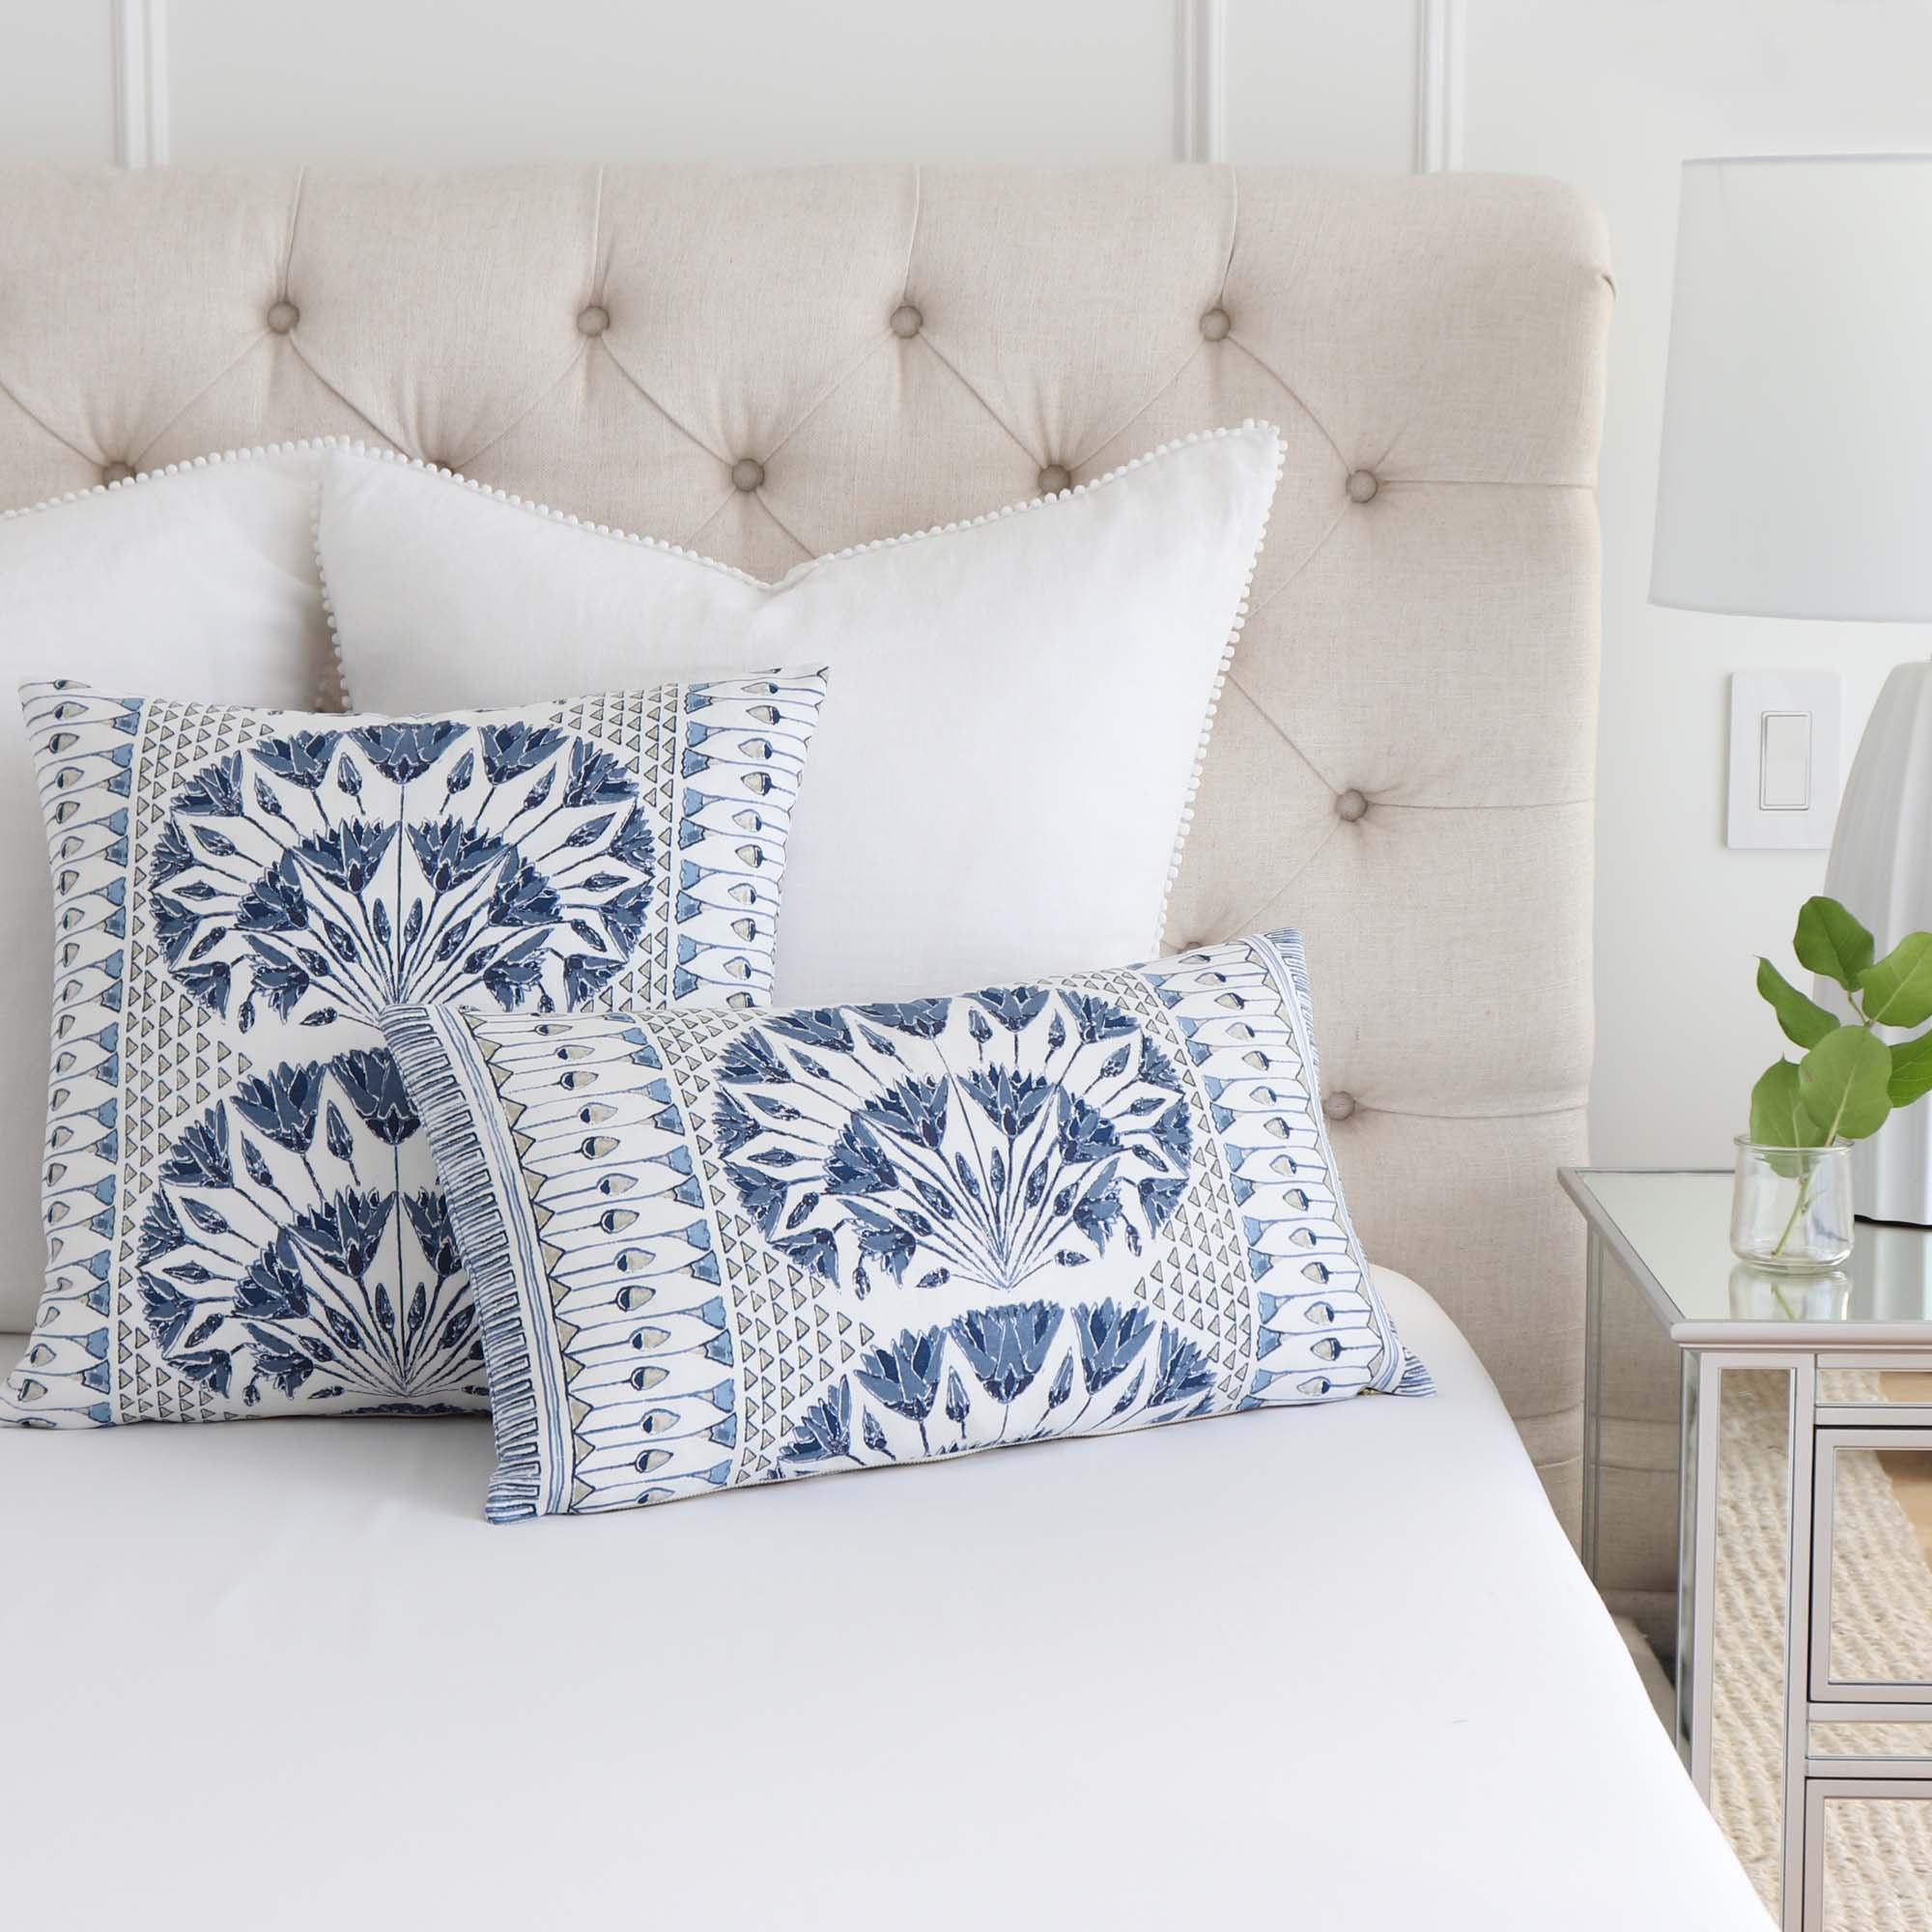 Thibaut Anna French Cairo Floral Blue Designer Luxury Throw Pillow Cover with White Euro Shams on King Bed